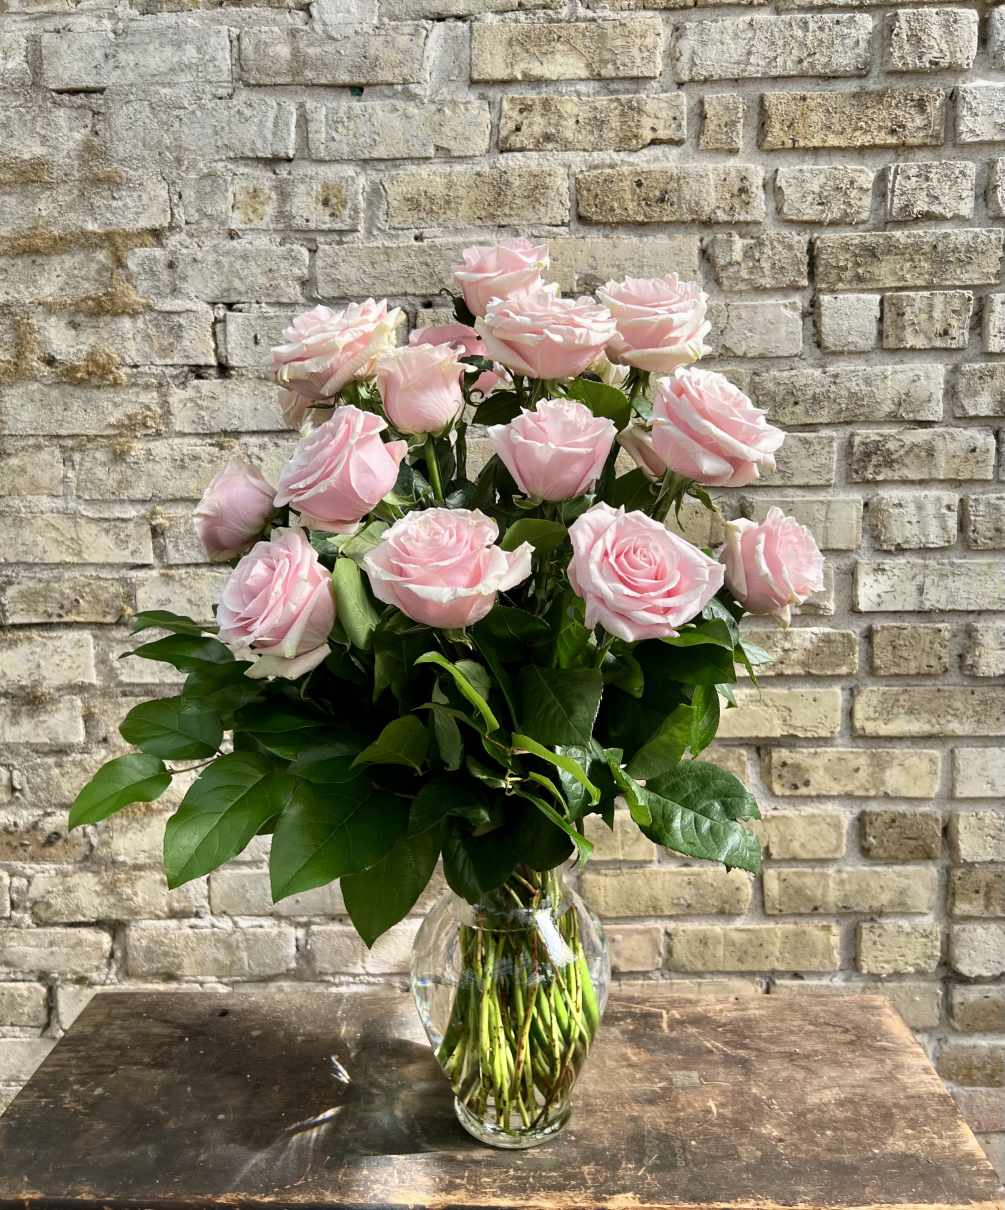 18 Beautiful Pink Roses in a Clear Glass Vase. 
With Their Soft